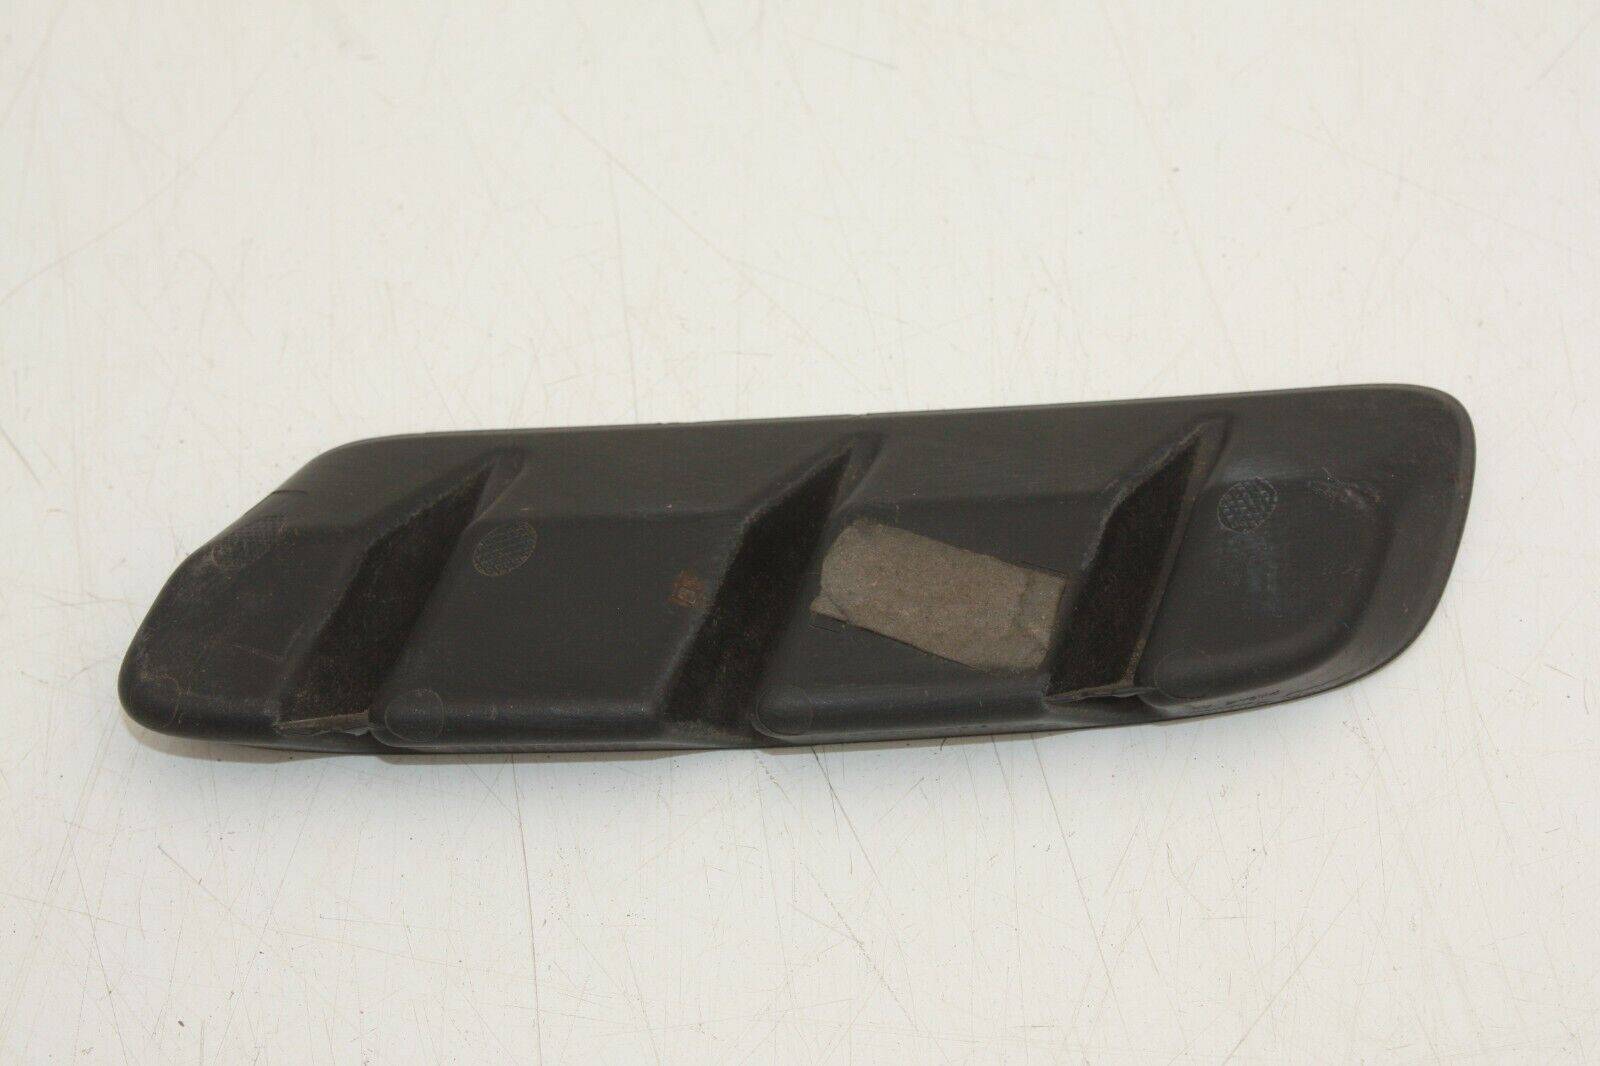 Audi-TT-Coupe-Roadster-Right-Side-Air-Outlet-Trim-8S0807946-Genuine-175872657084-4